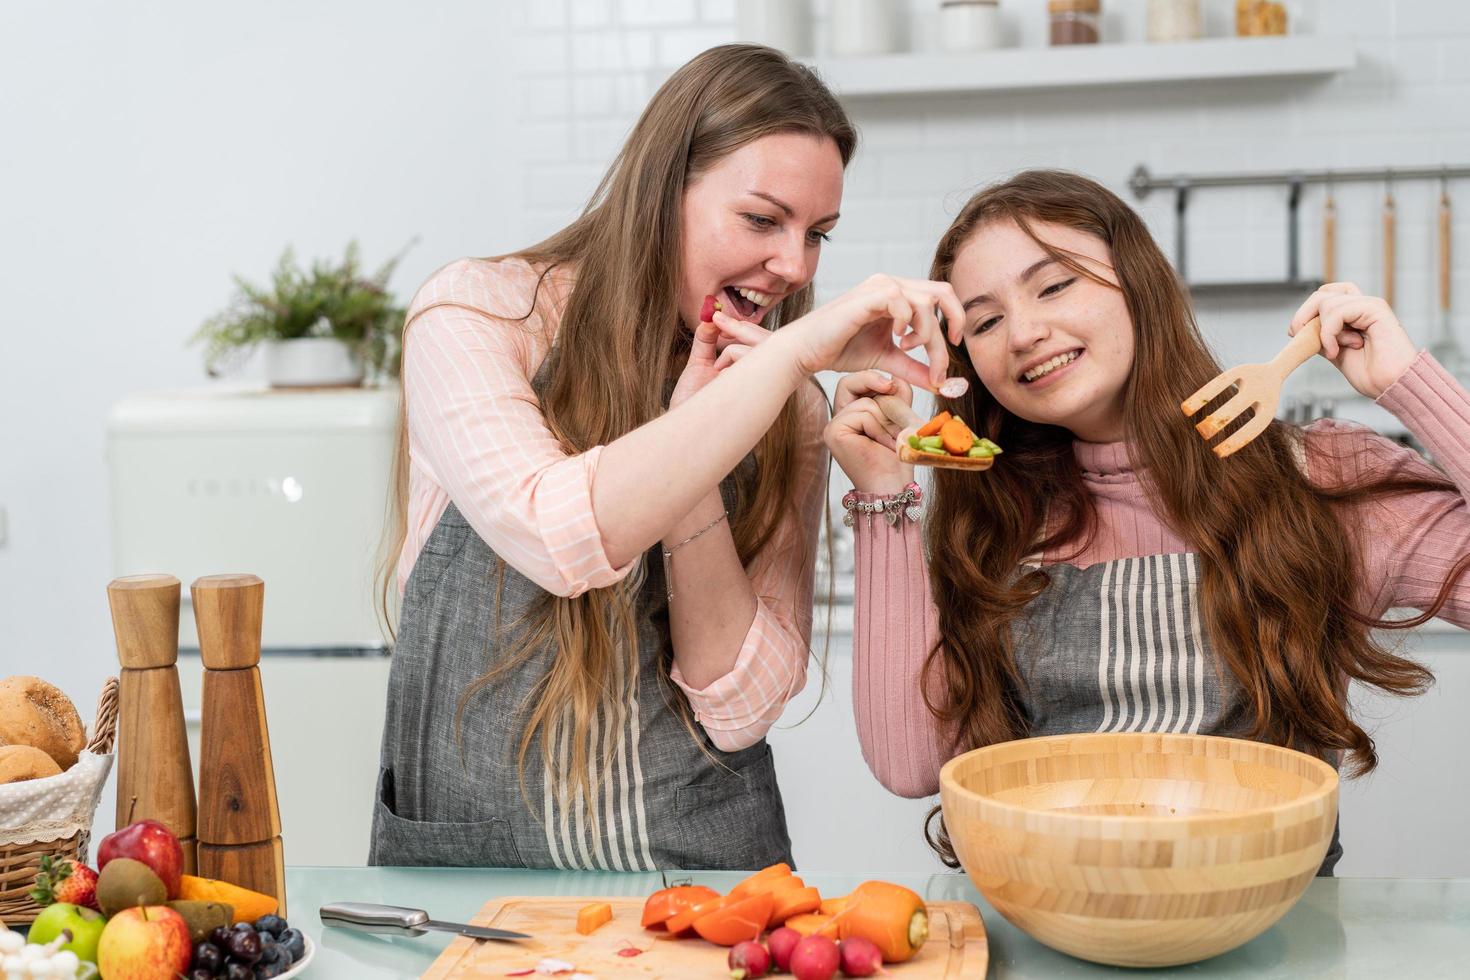 Happy mother and daughter enjoy cooking homemade salad in the kitchen. smiling girl preparing vegetables. kid activity with parent at home photo